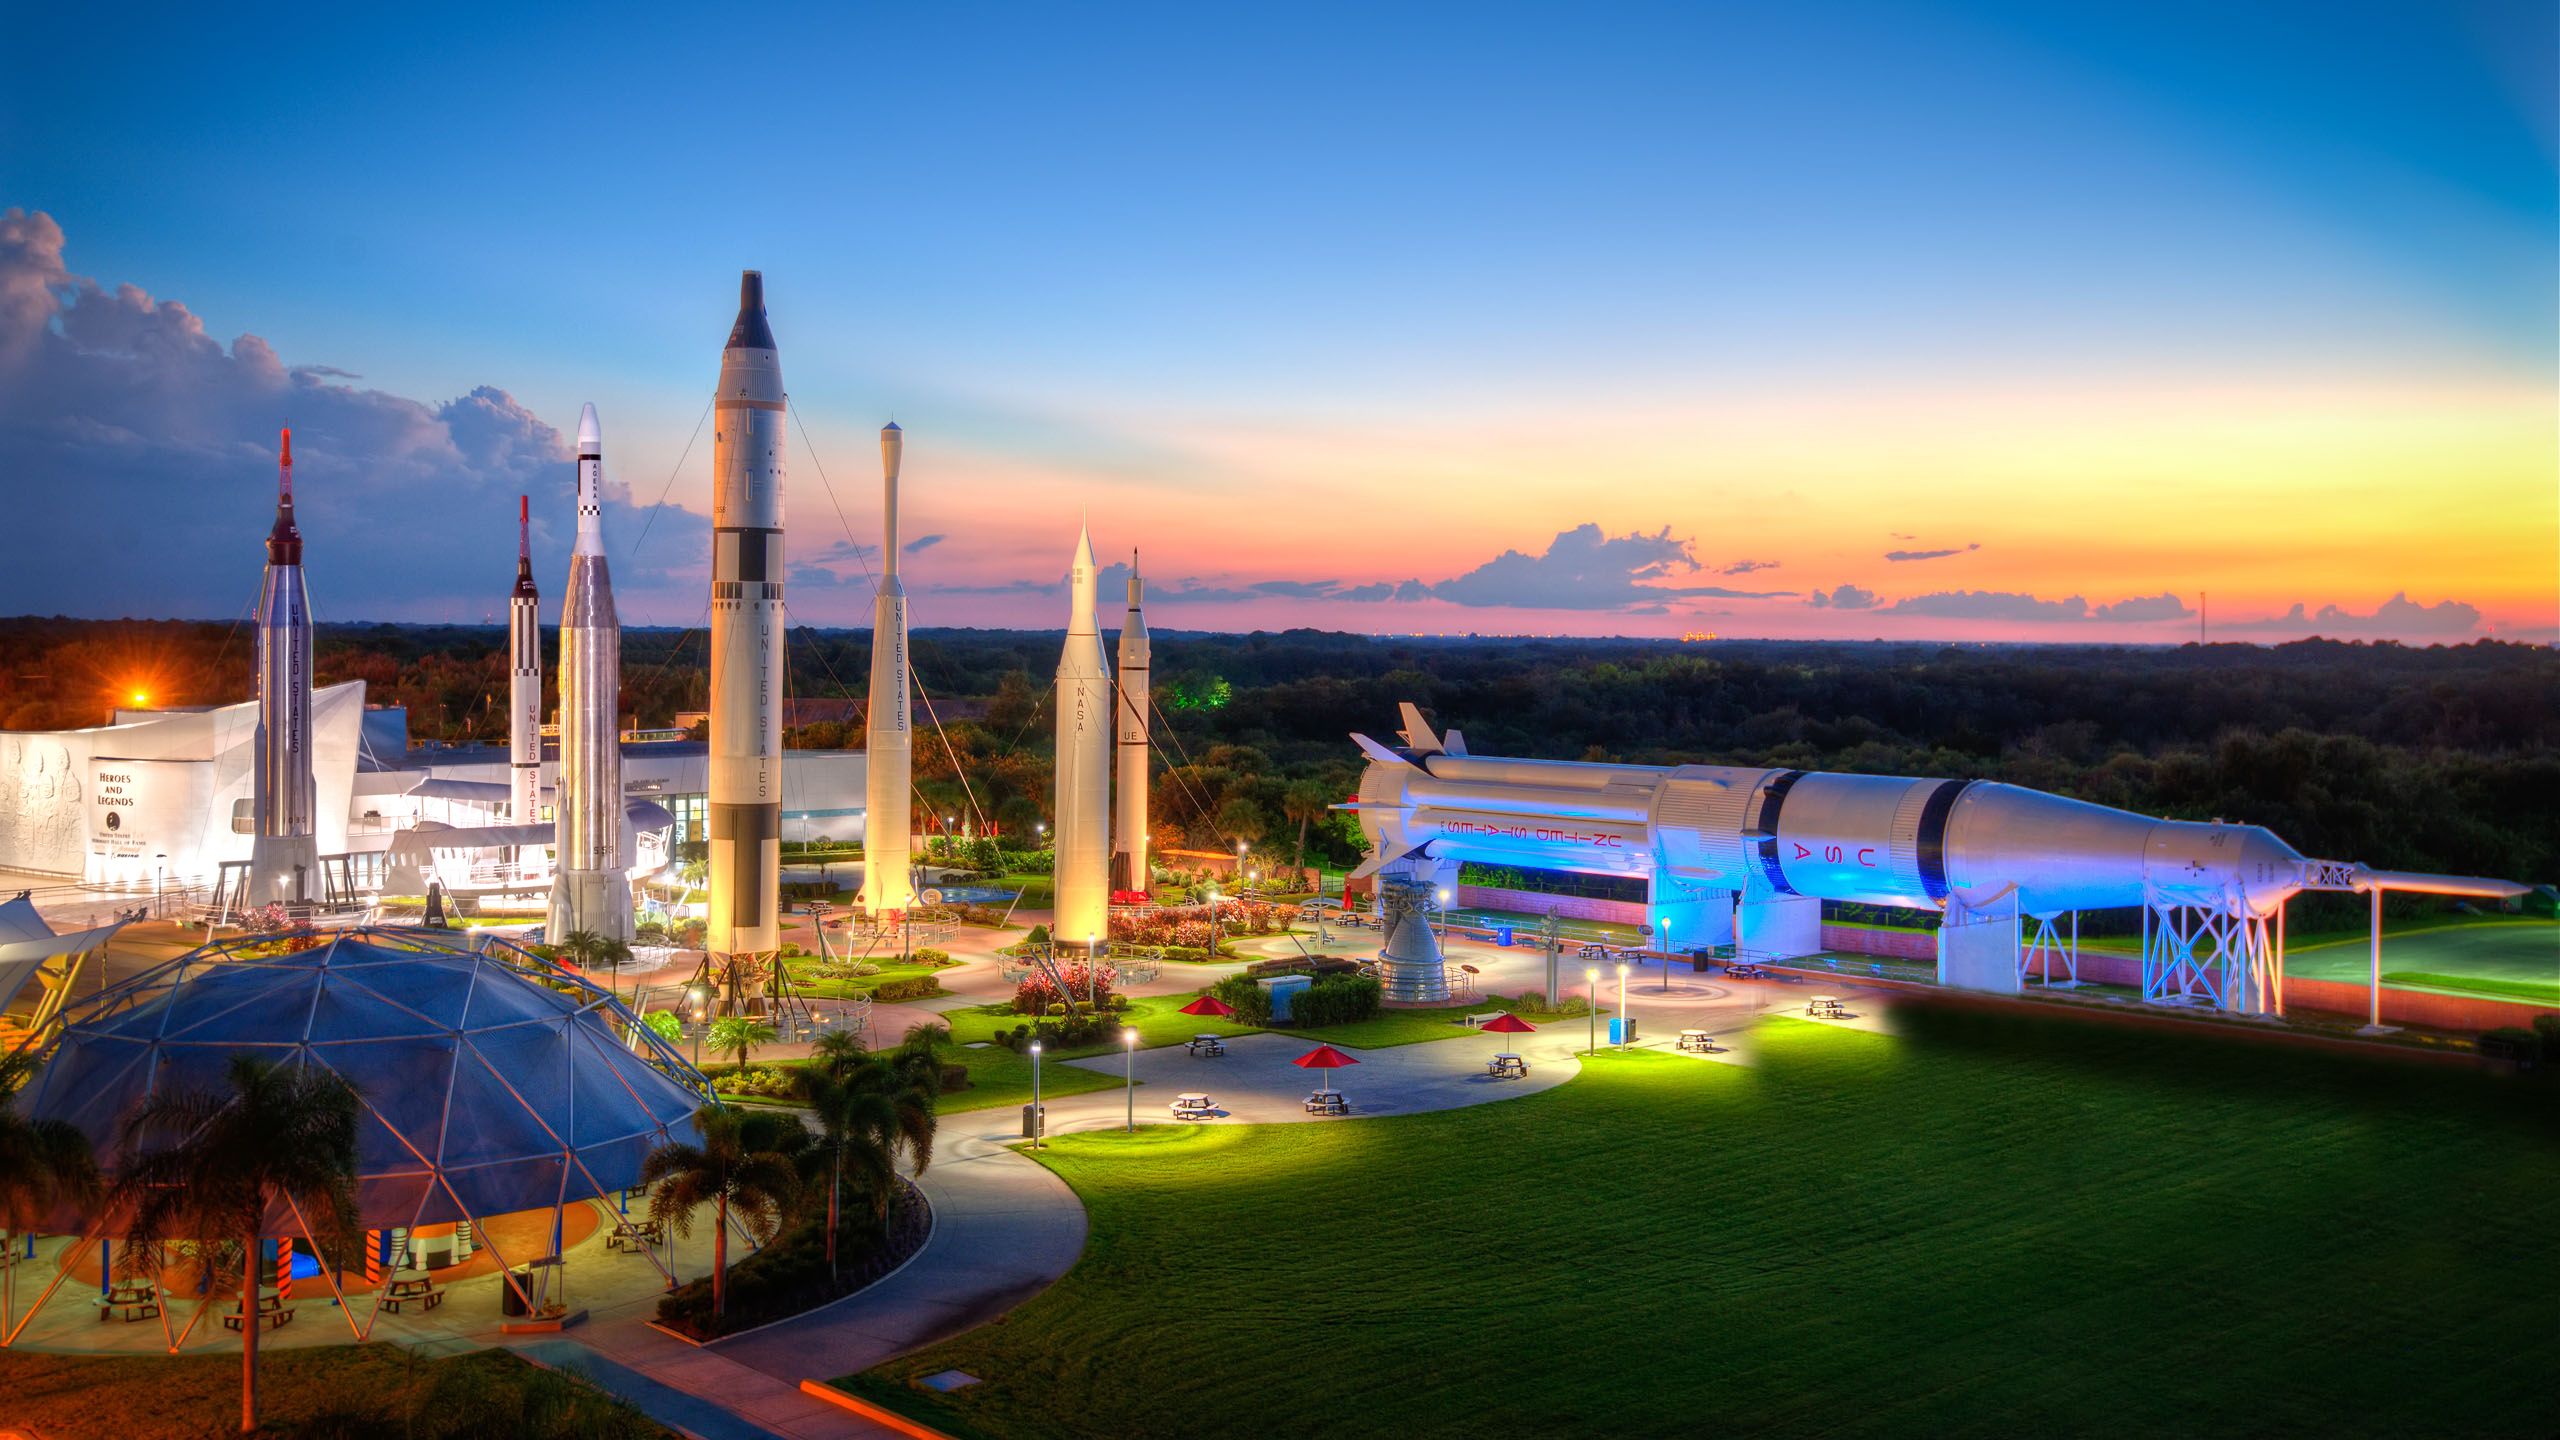 10 TOP Things to Do in Cape Canaveral (2020 Activity Guide) Expedia